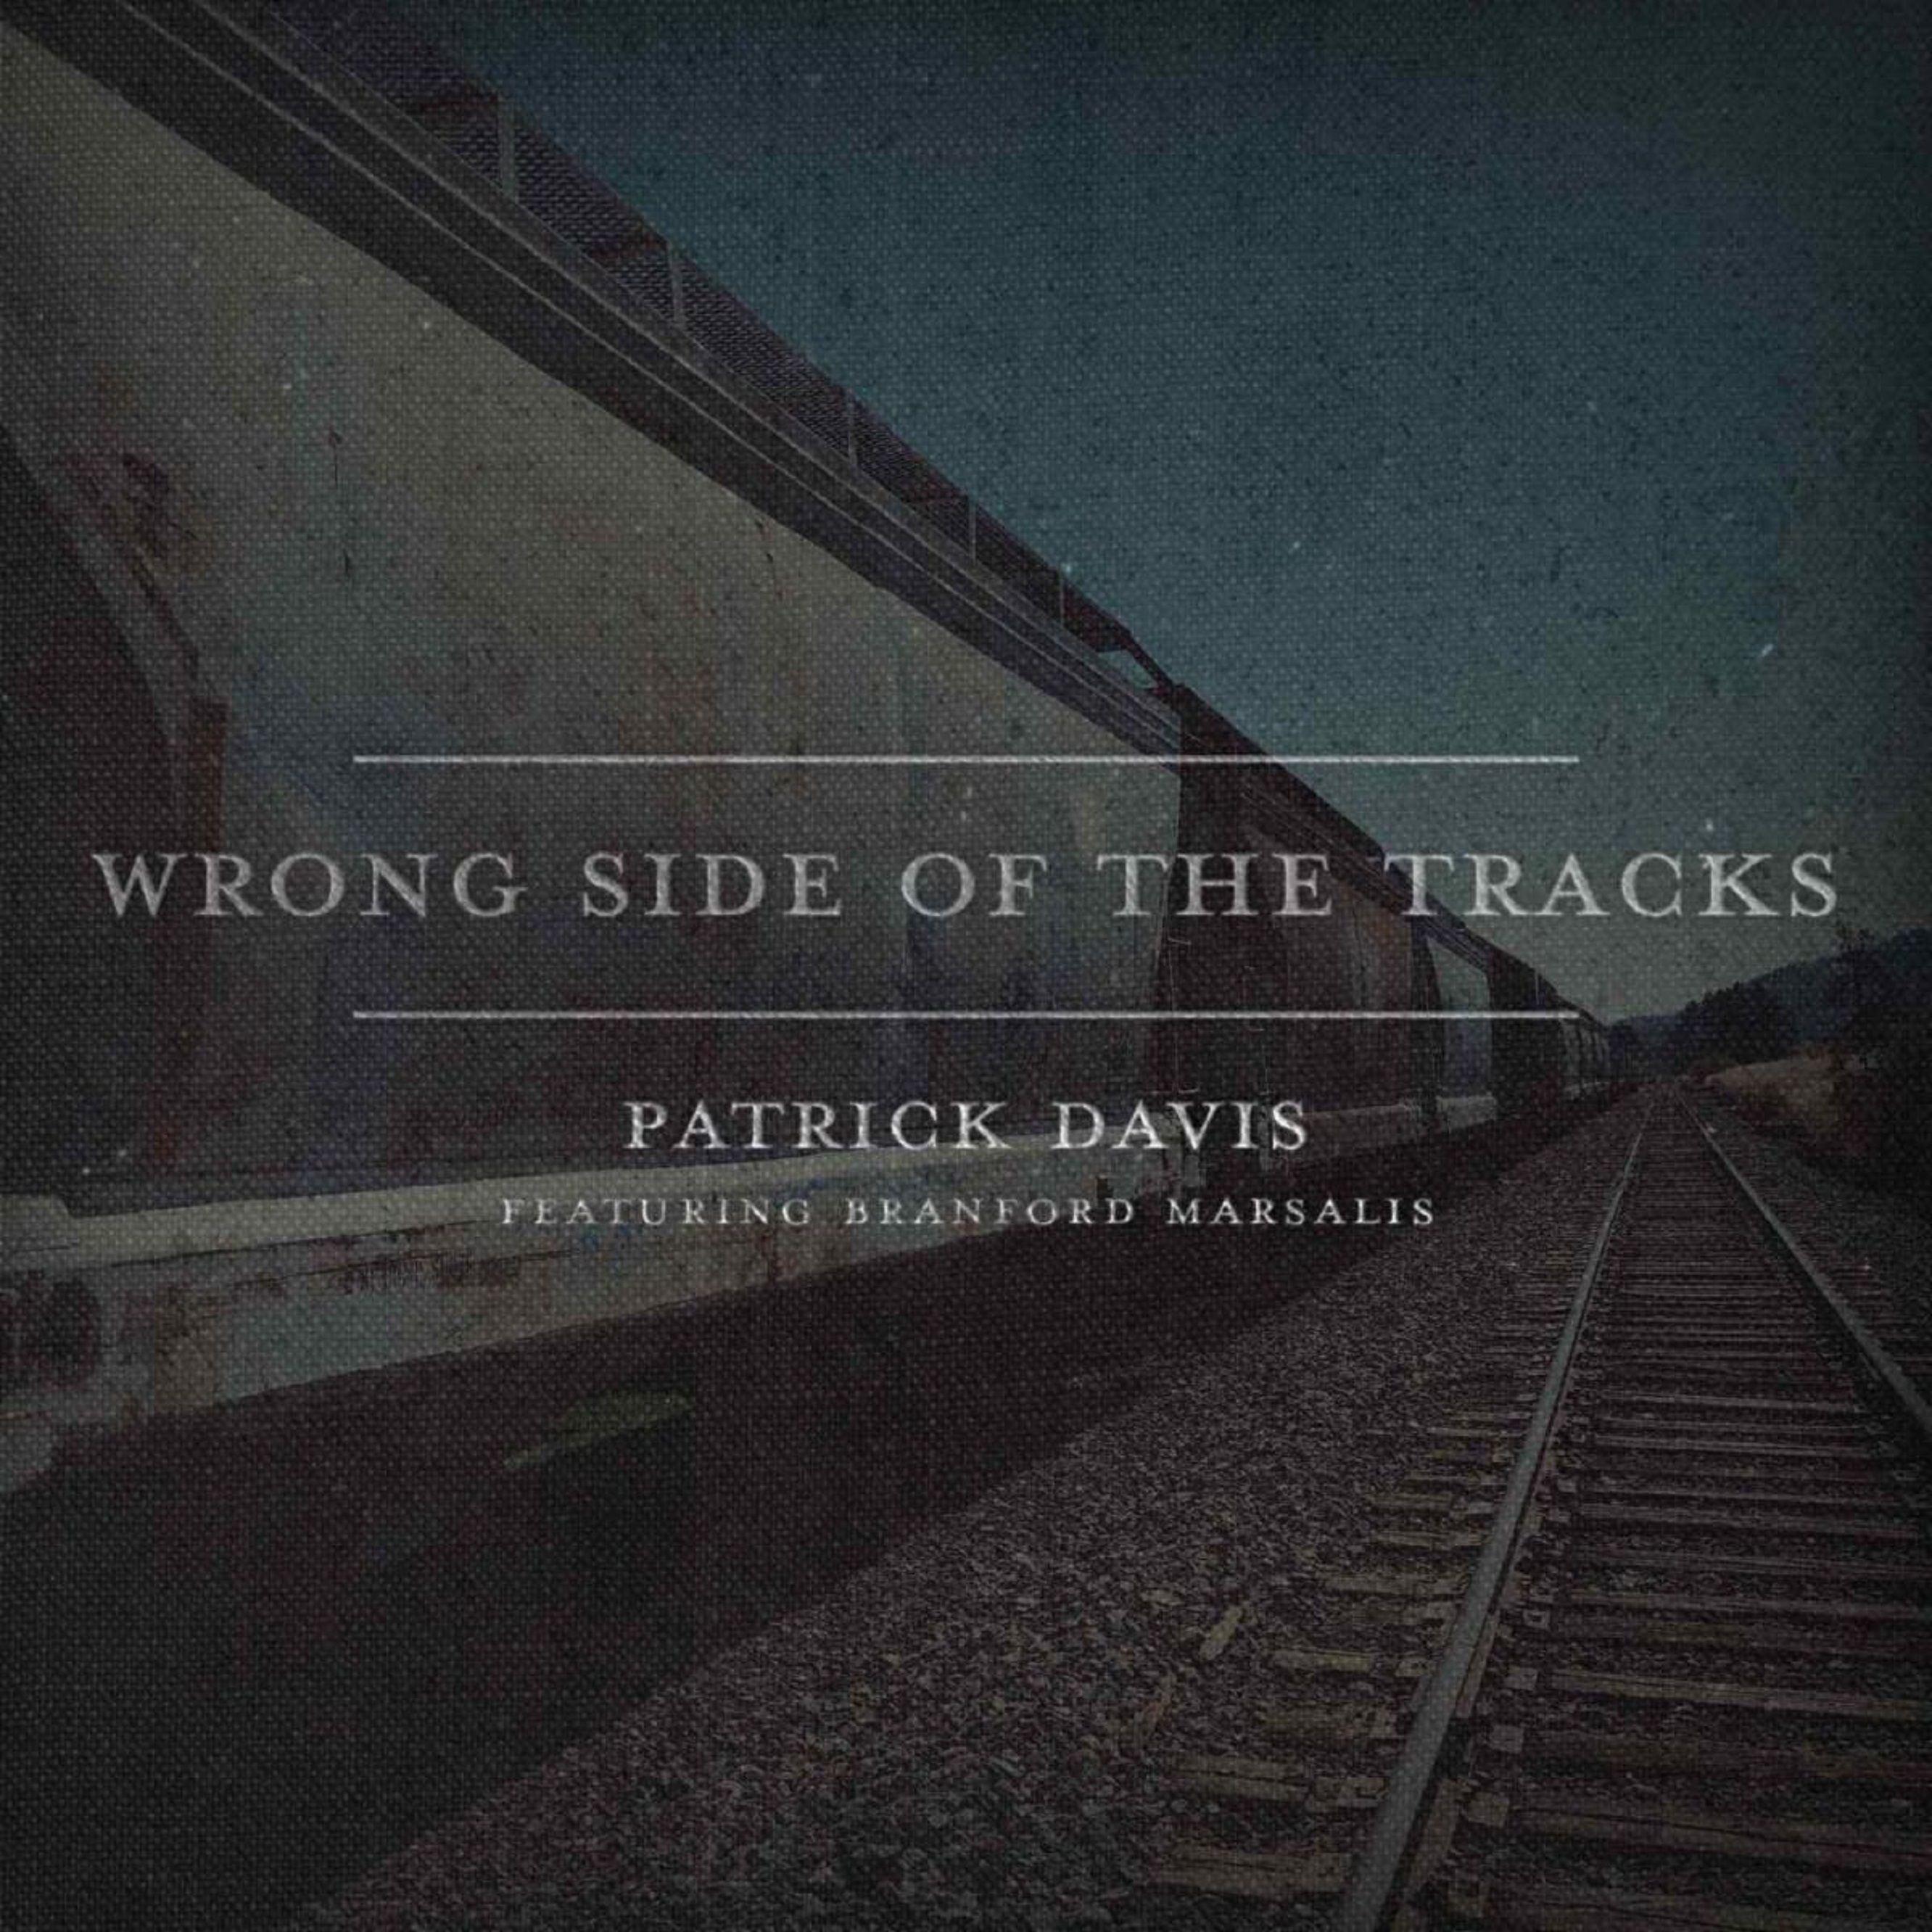 Patrick Davis Shares "Wrong Side of the Tracks" ft. Branford Marsalis, co-written with Guy Clark